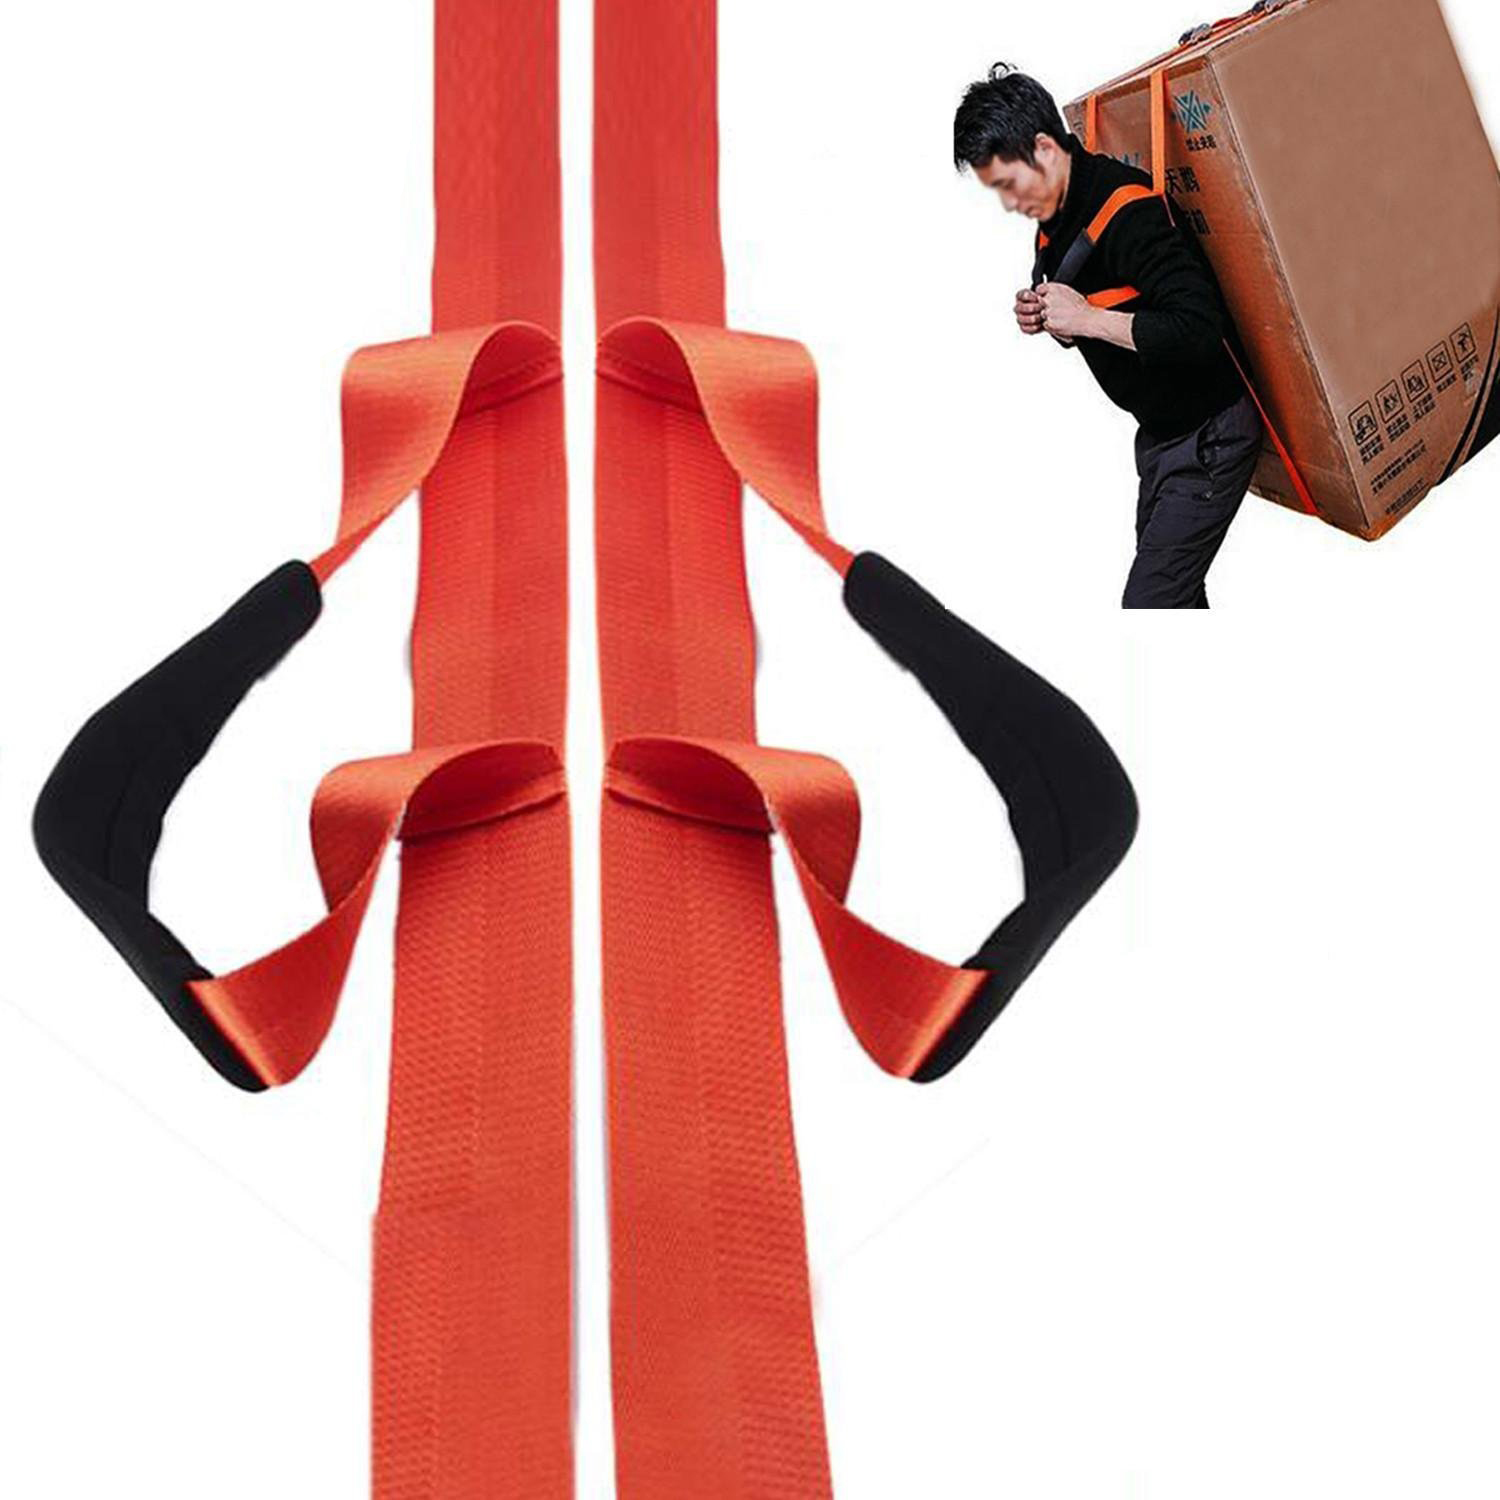 1 Person Furniture Lifting Moving Straps Carrying Belts Ergonomic Adjustable Length Appliances Lifting Straps Heavy Duty Carrying Harnesses for One Person